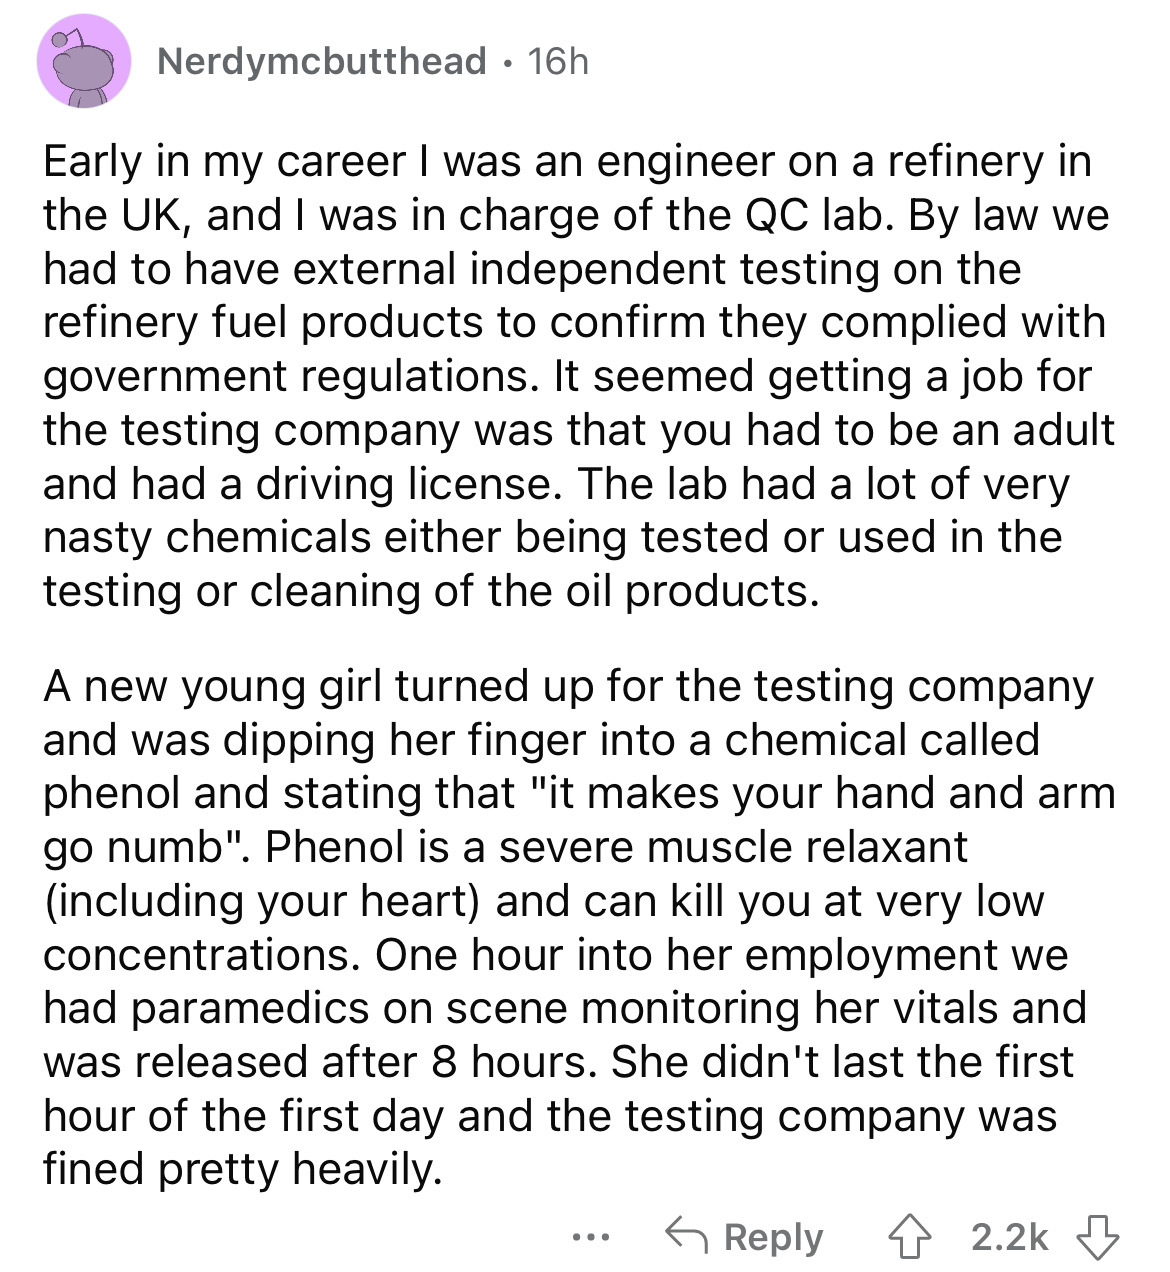 document - Nerdymcbutthead 16h Early in my career I was an engineer on a refinery in the Uk, and I was in charge of the Qc lab. By law we had to have external independent testing on the refinery fuel products to confirm they complied with government regul